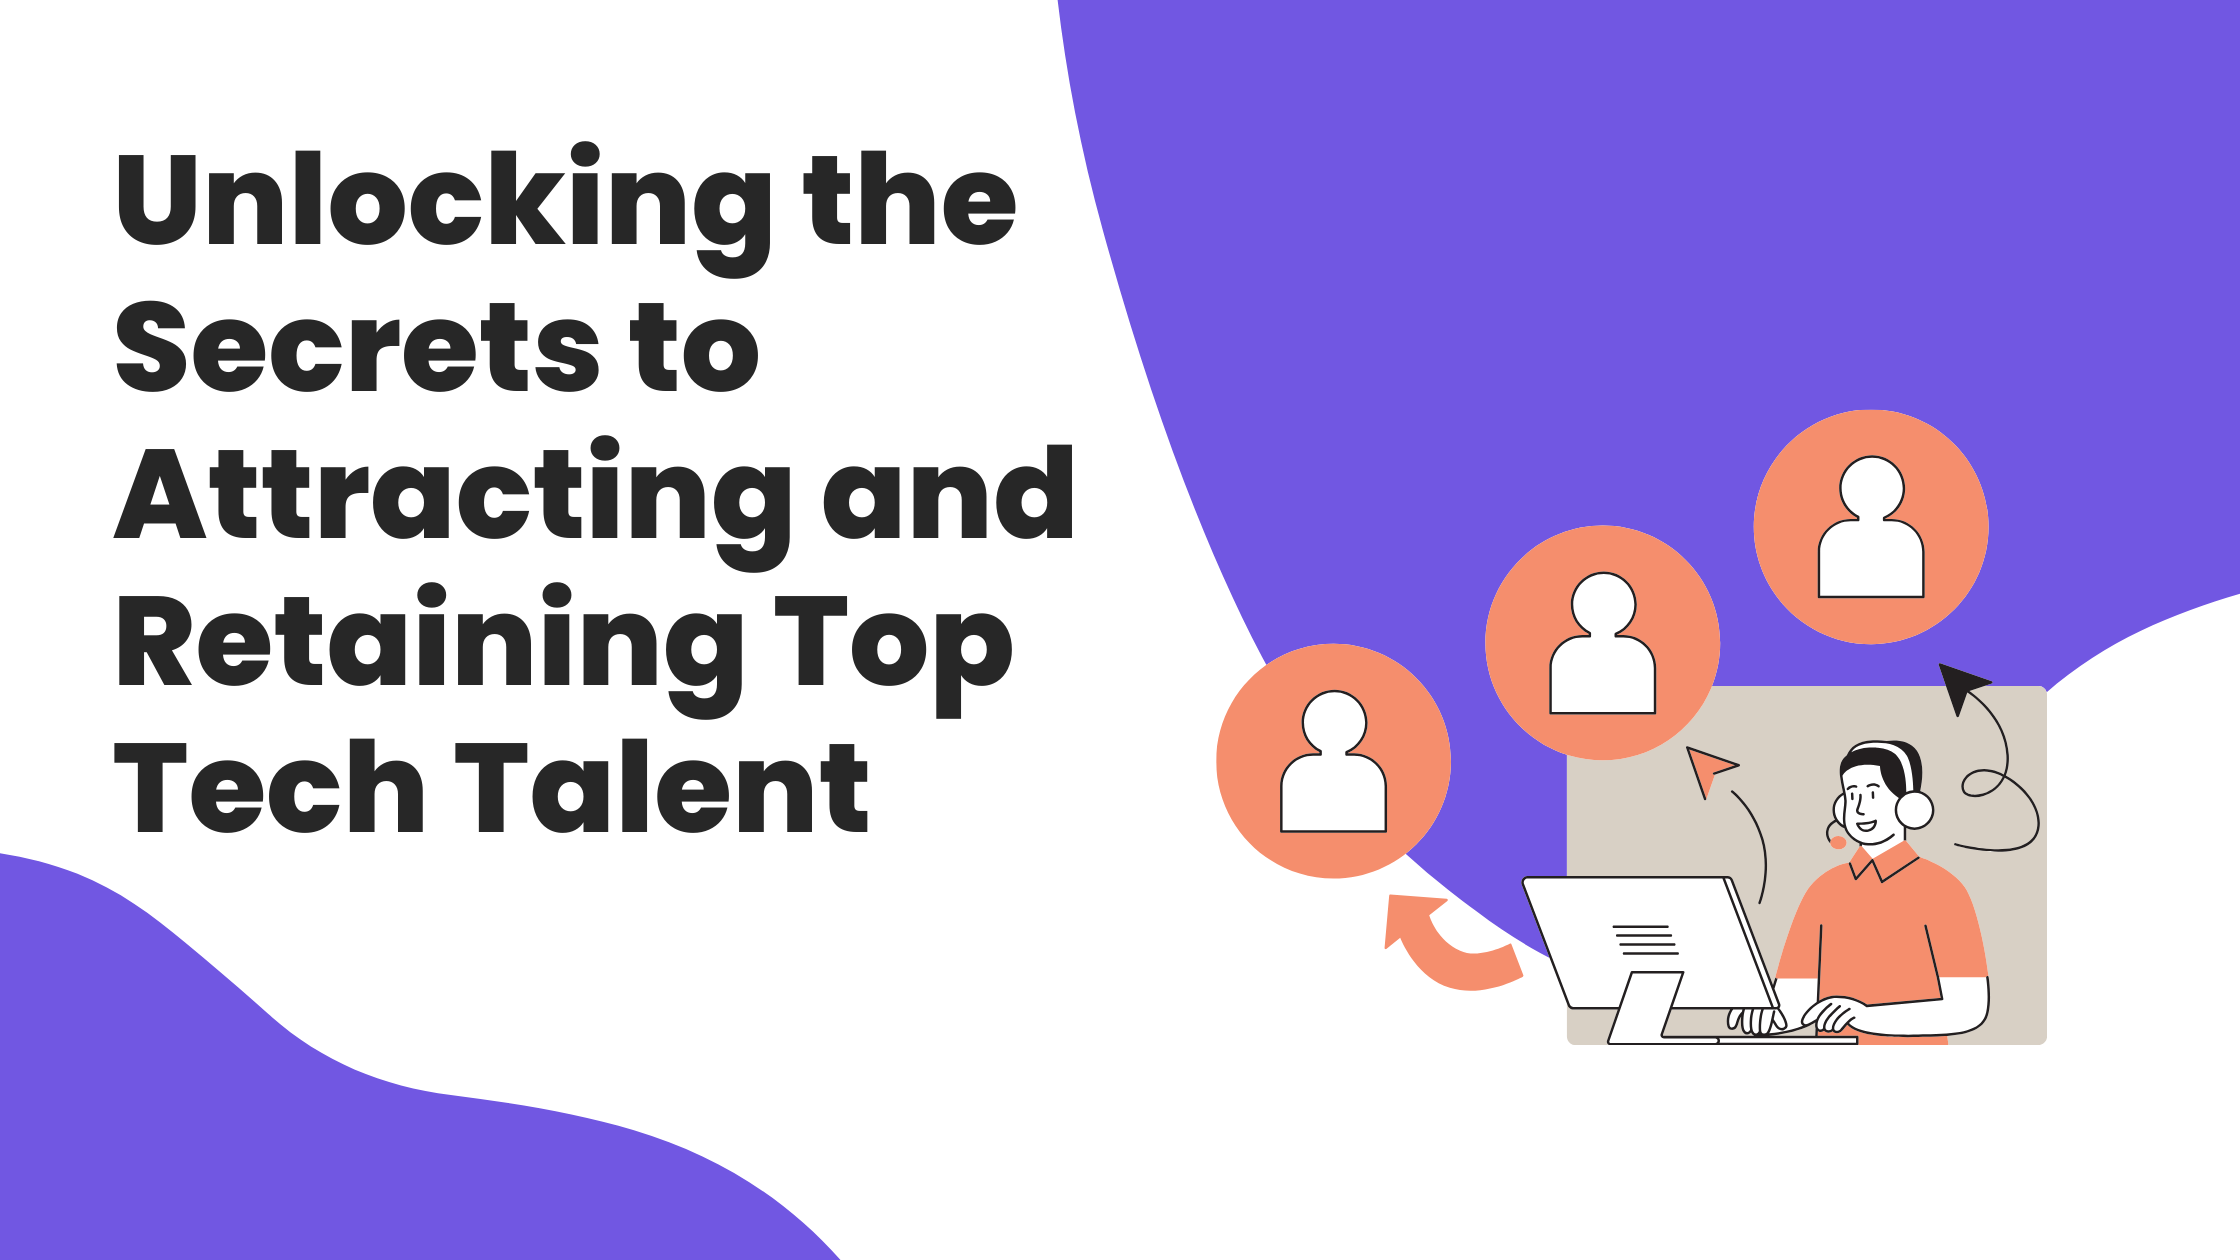 Unlocking the Secrets to Attracting and Retaining Top Tech Talent